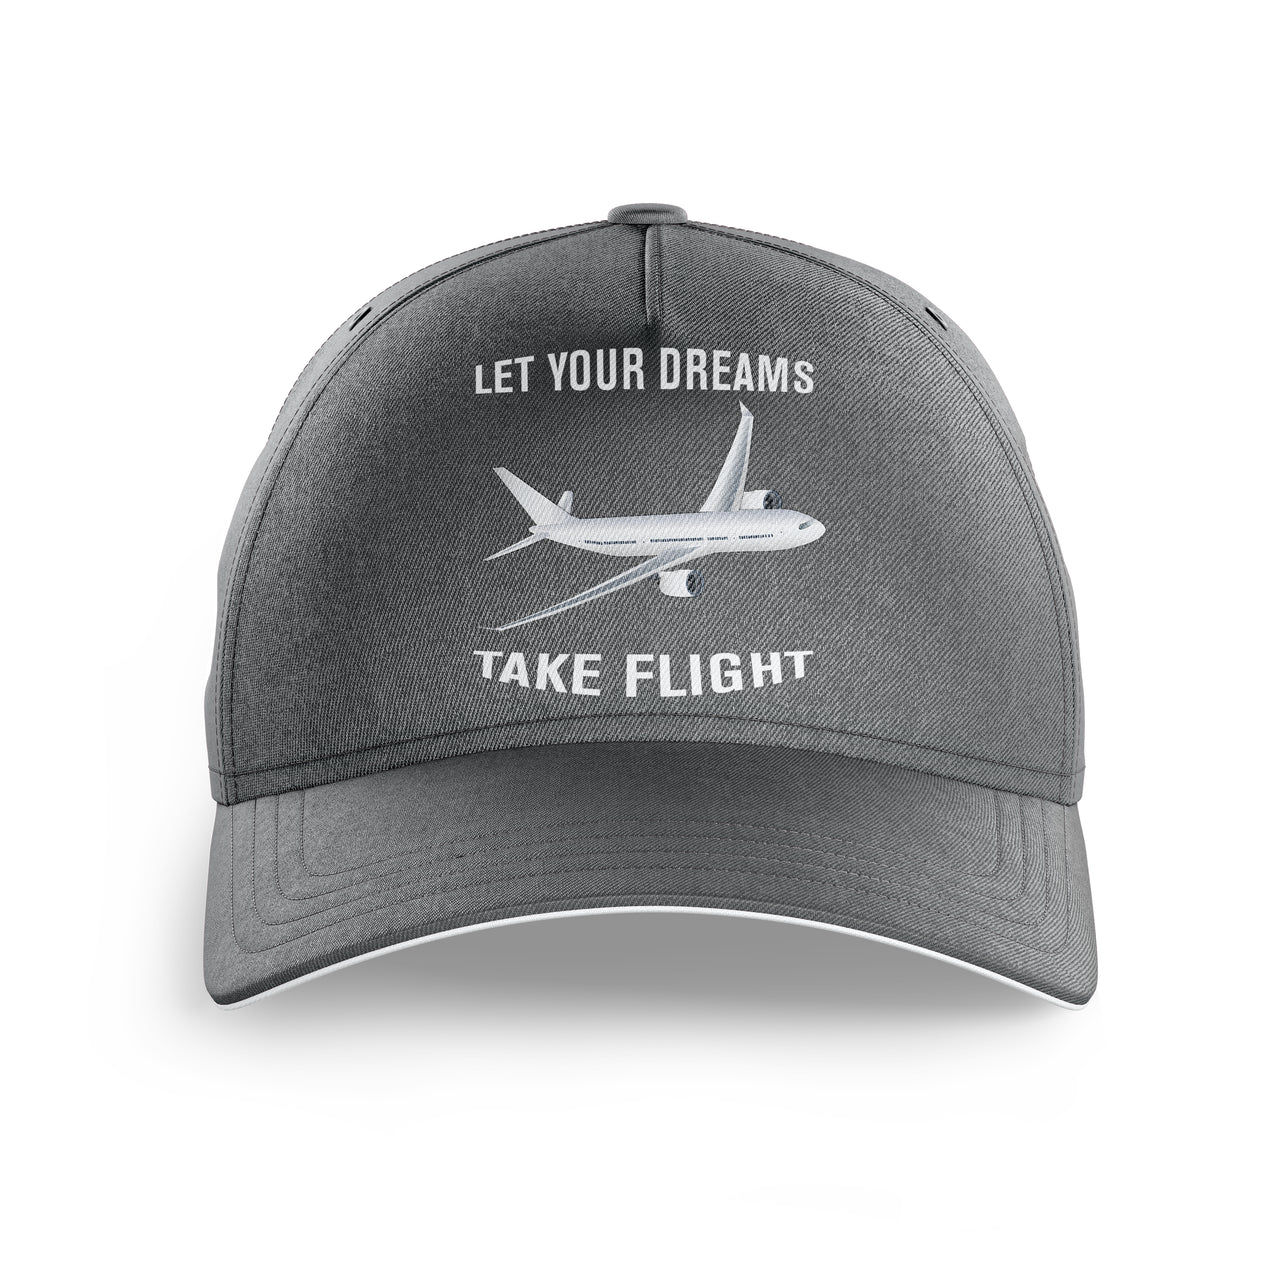 Let Your Dreams Take Flight Printed Hats